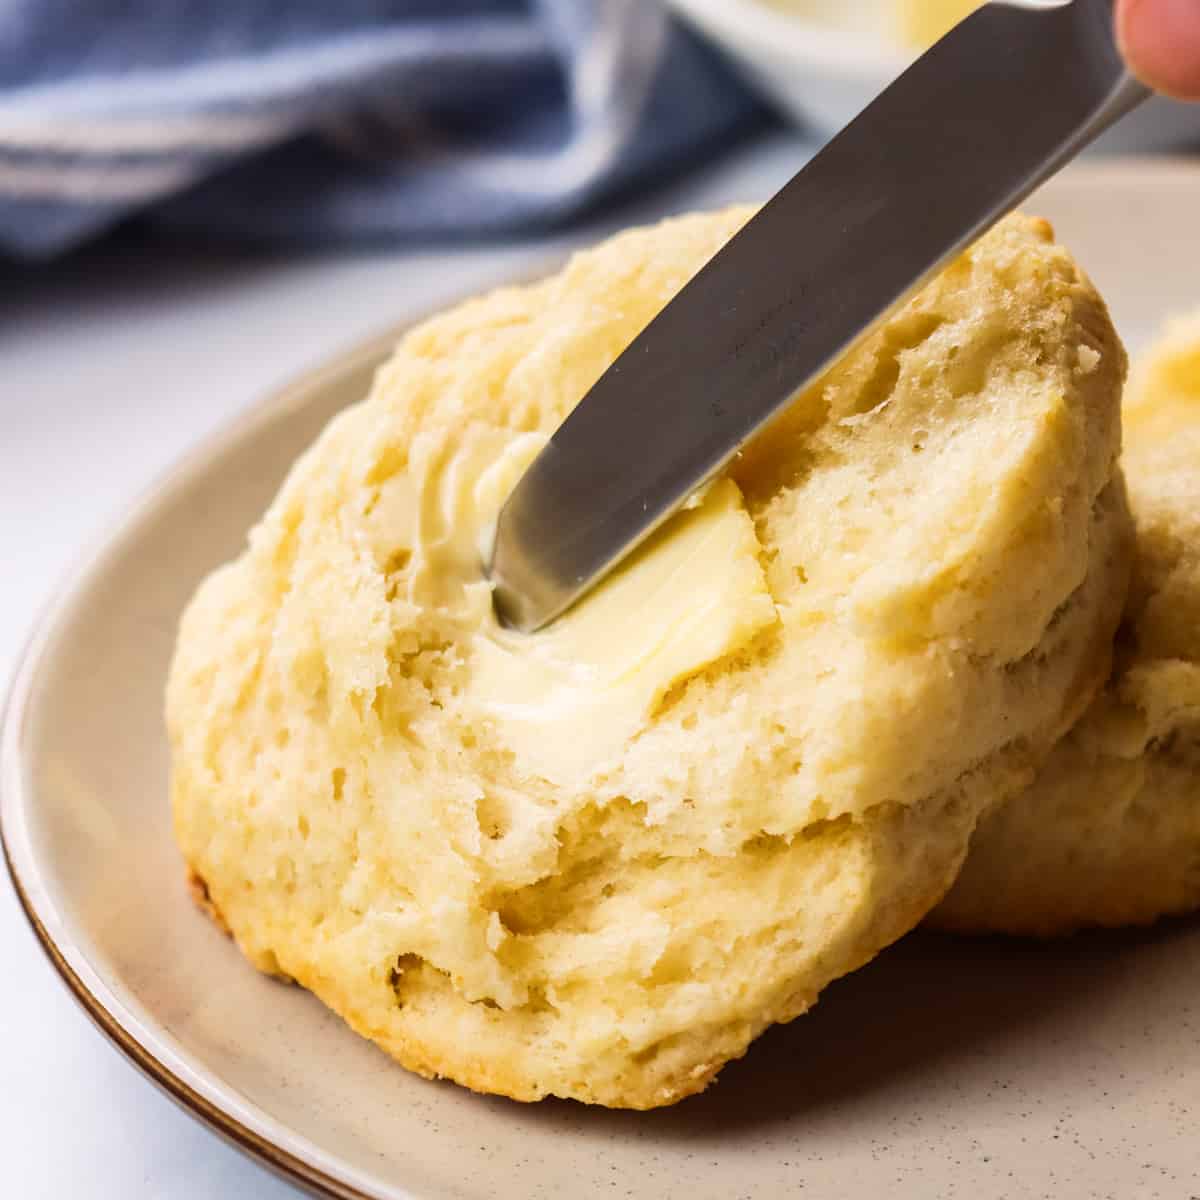 butter being spread on one half of a homemade biscuit